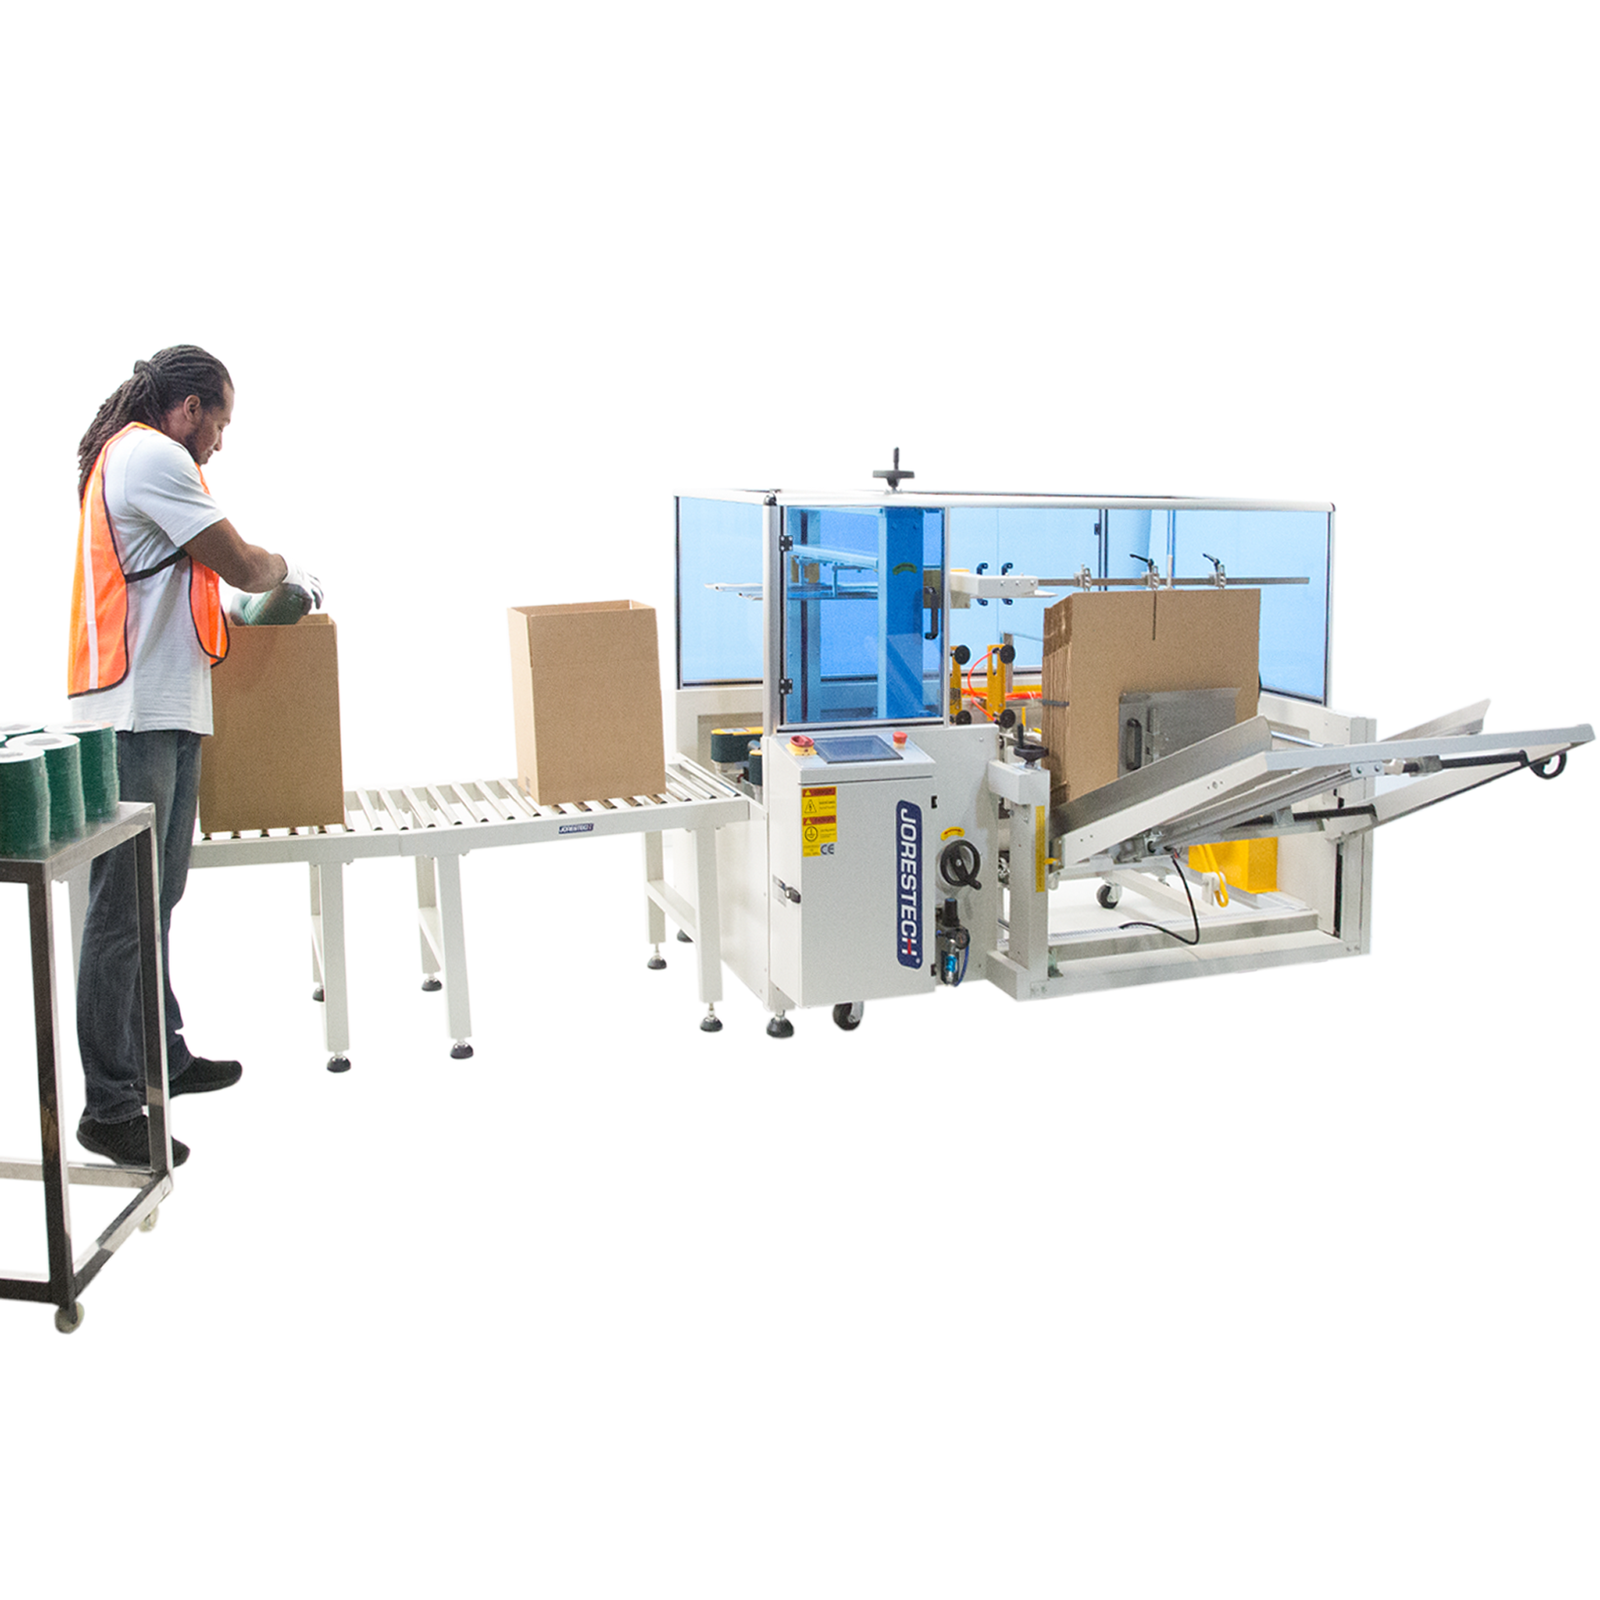 Automatic case erector with bottom tape sealer by JORES TECHNOLOGIES®  filled with brown unformed boxes.  A worker is inserting items into formed boxes coming from out of the case erector.